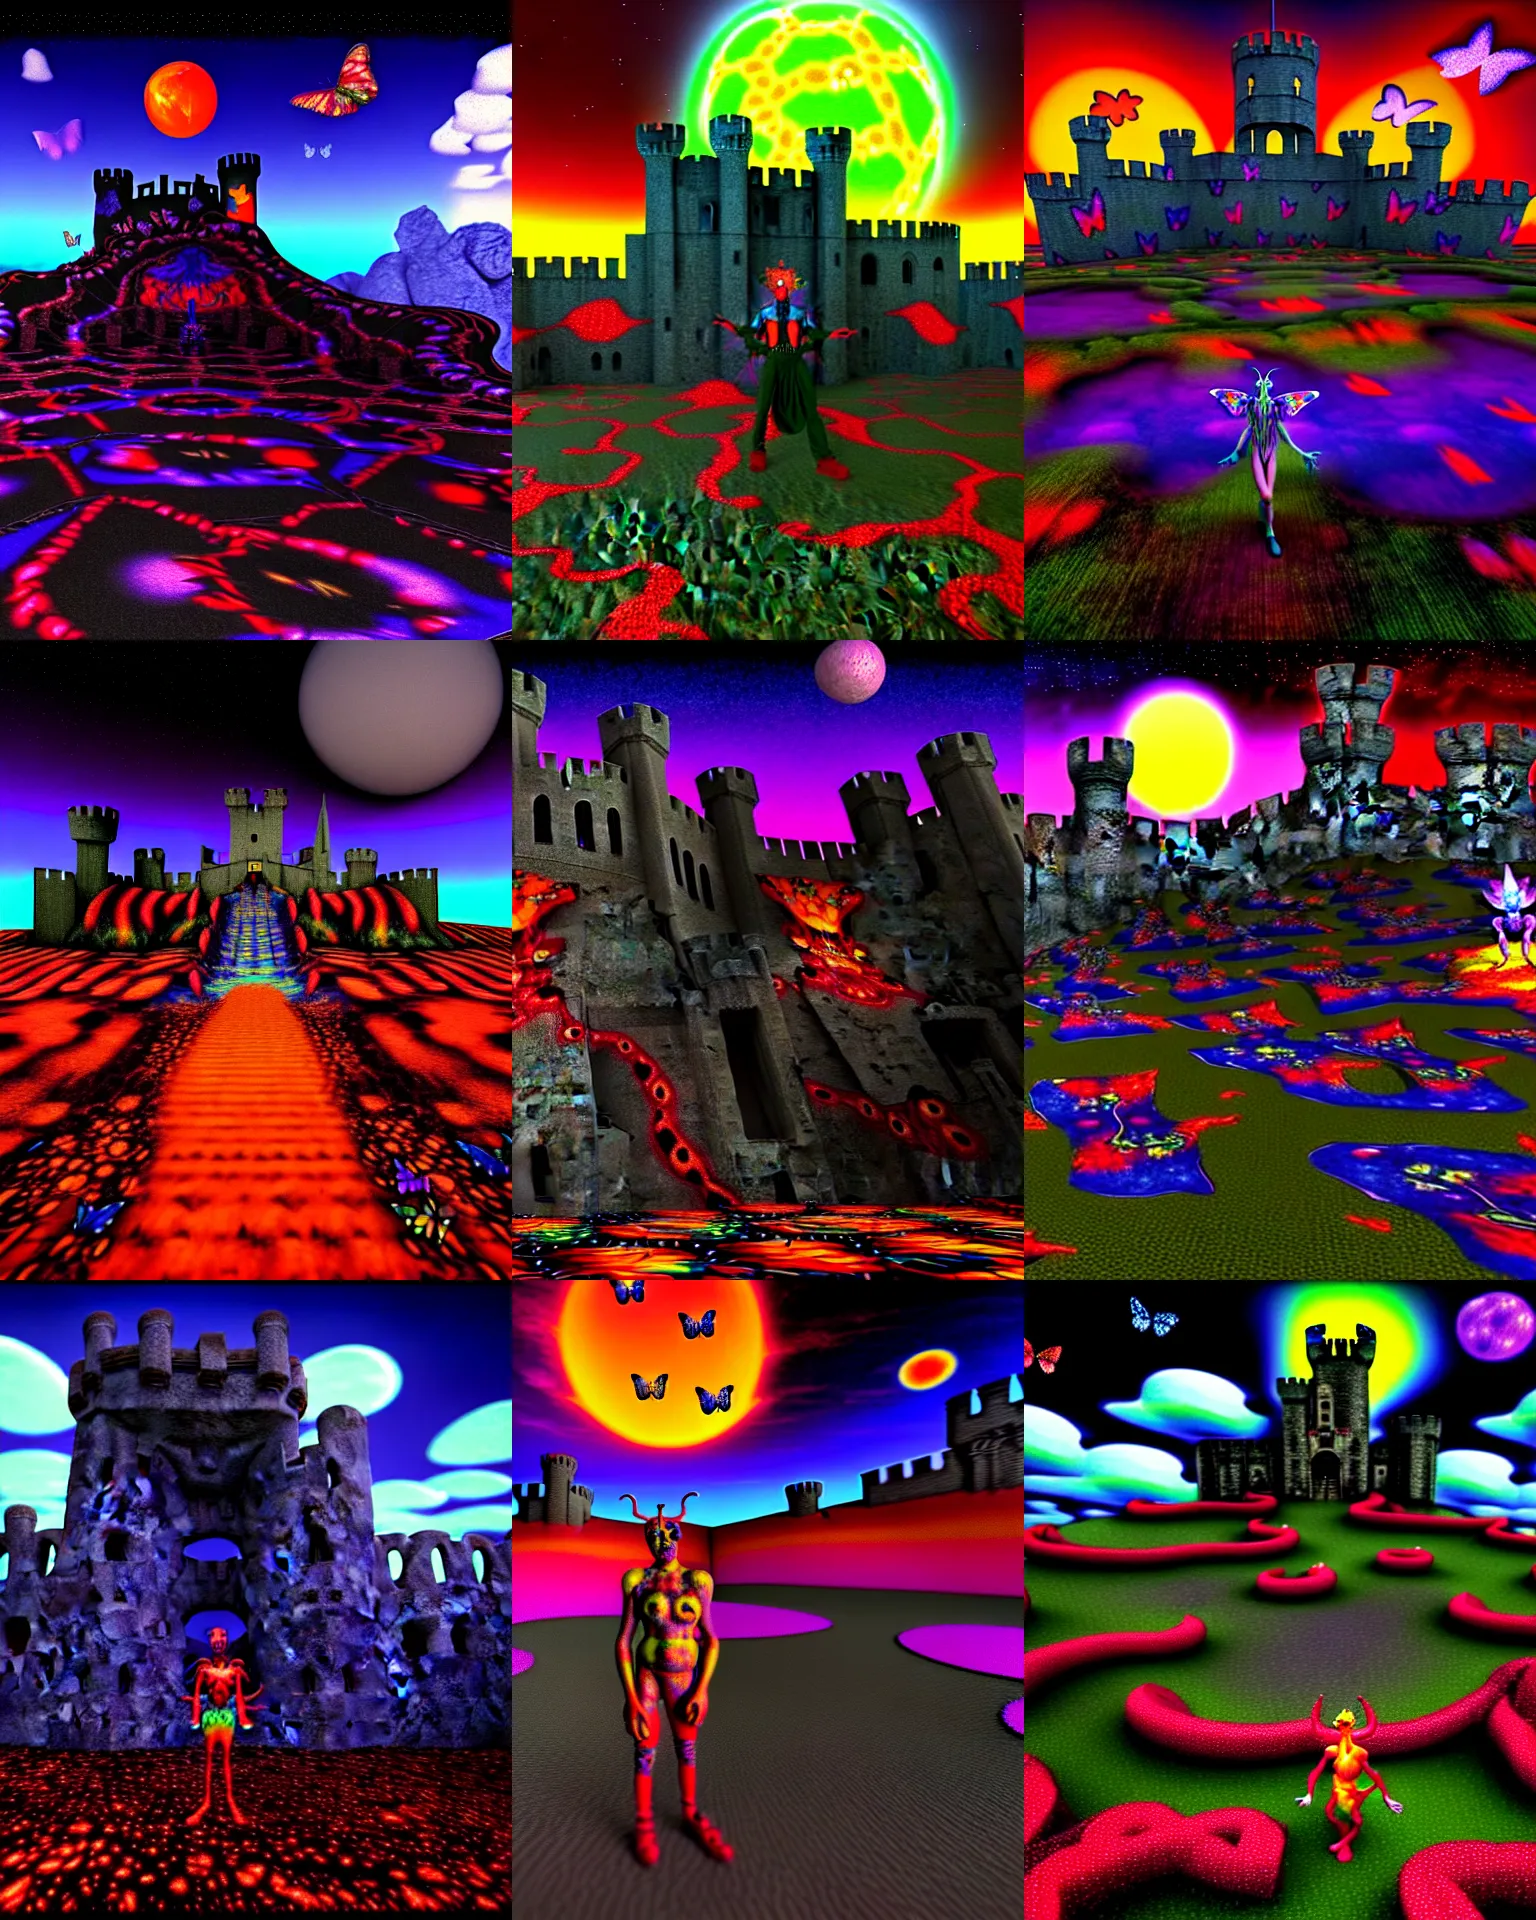 Prompt: early 3 d cgi render of hell jester standing in hell mountain landscape with castle ruins against a psychedelic surreal background with 3 d butterflies and 3 d flowers n the style of 1 9 9 0's cg graphics against the cloudy night sky, twisted metal playstation graphics, 3 do magazine, wide shot